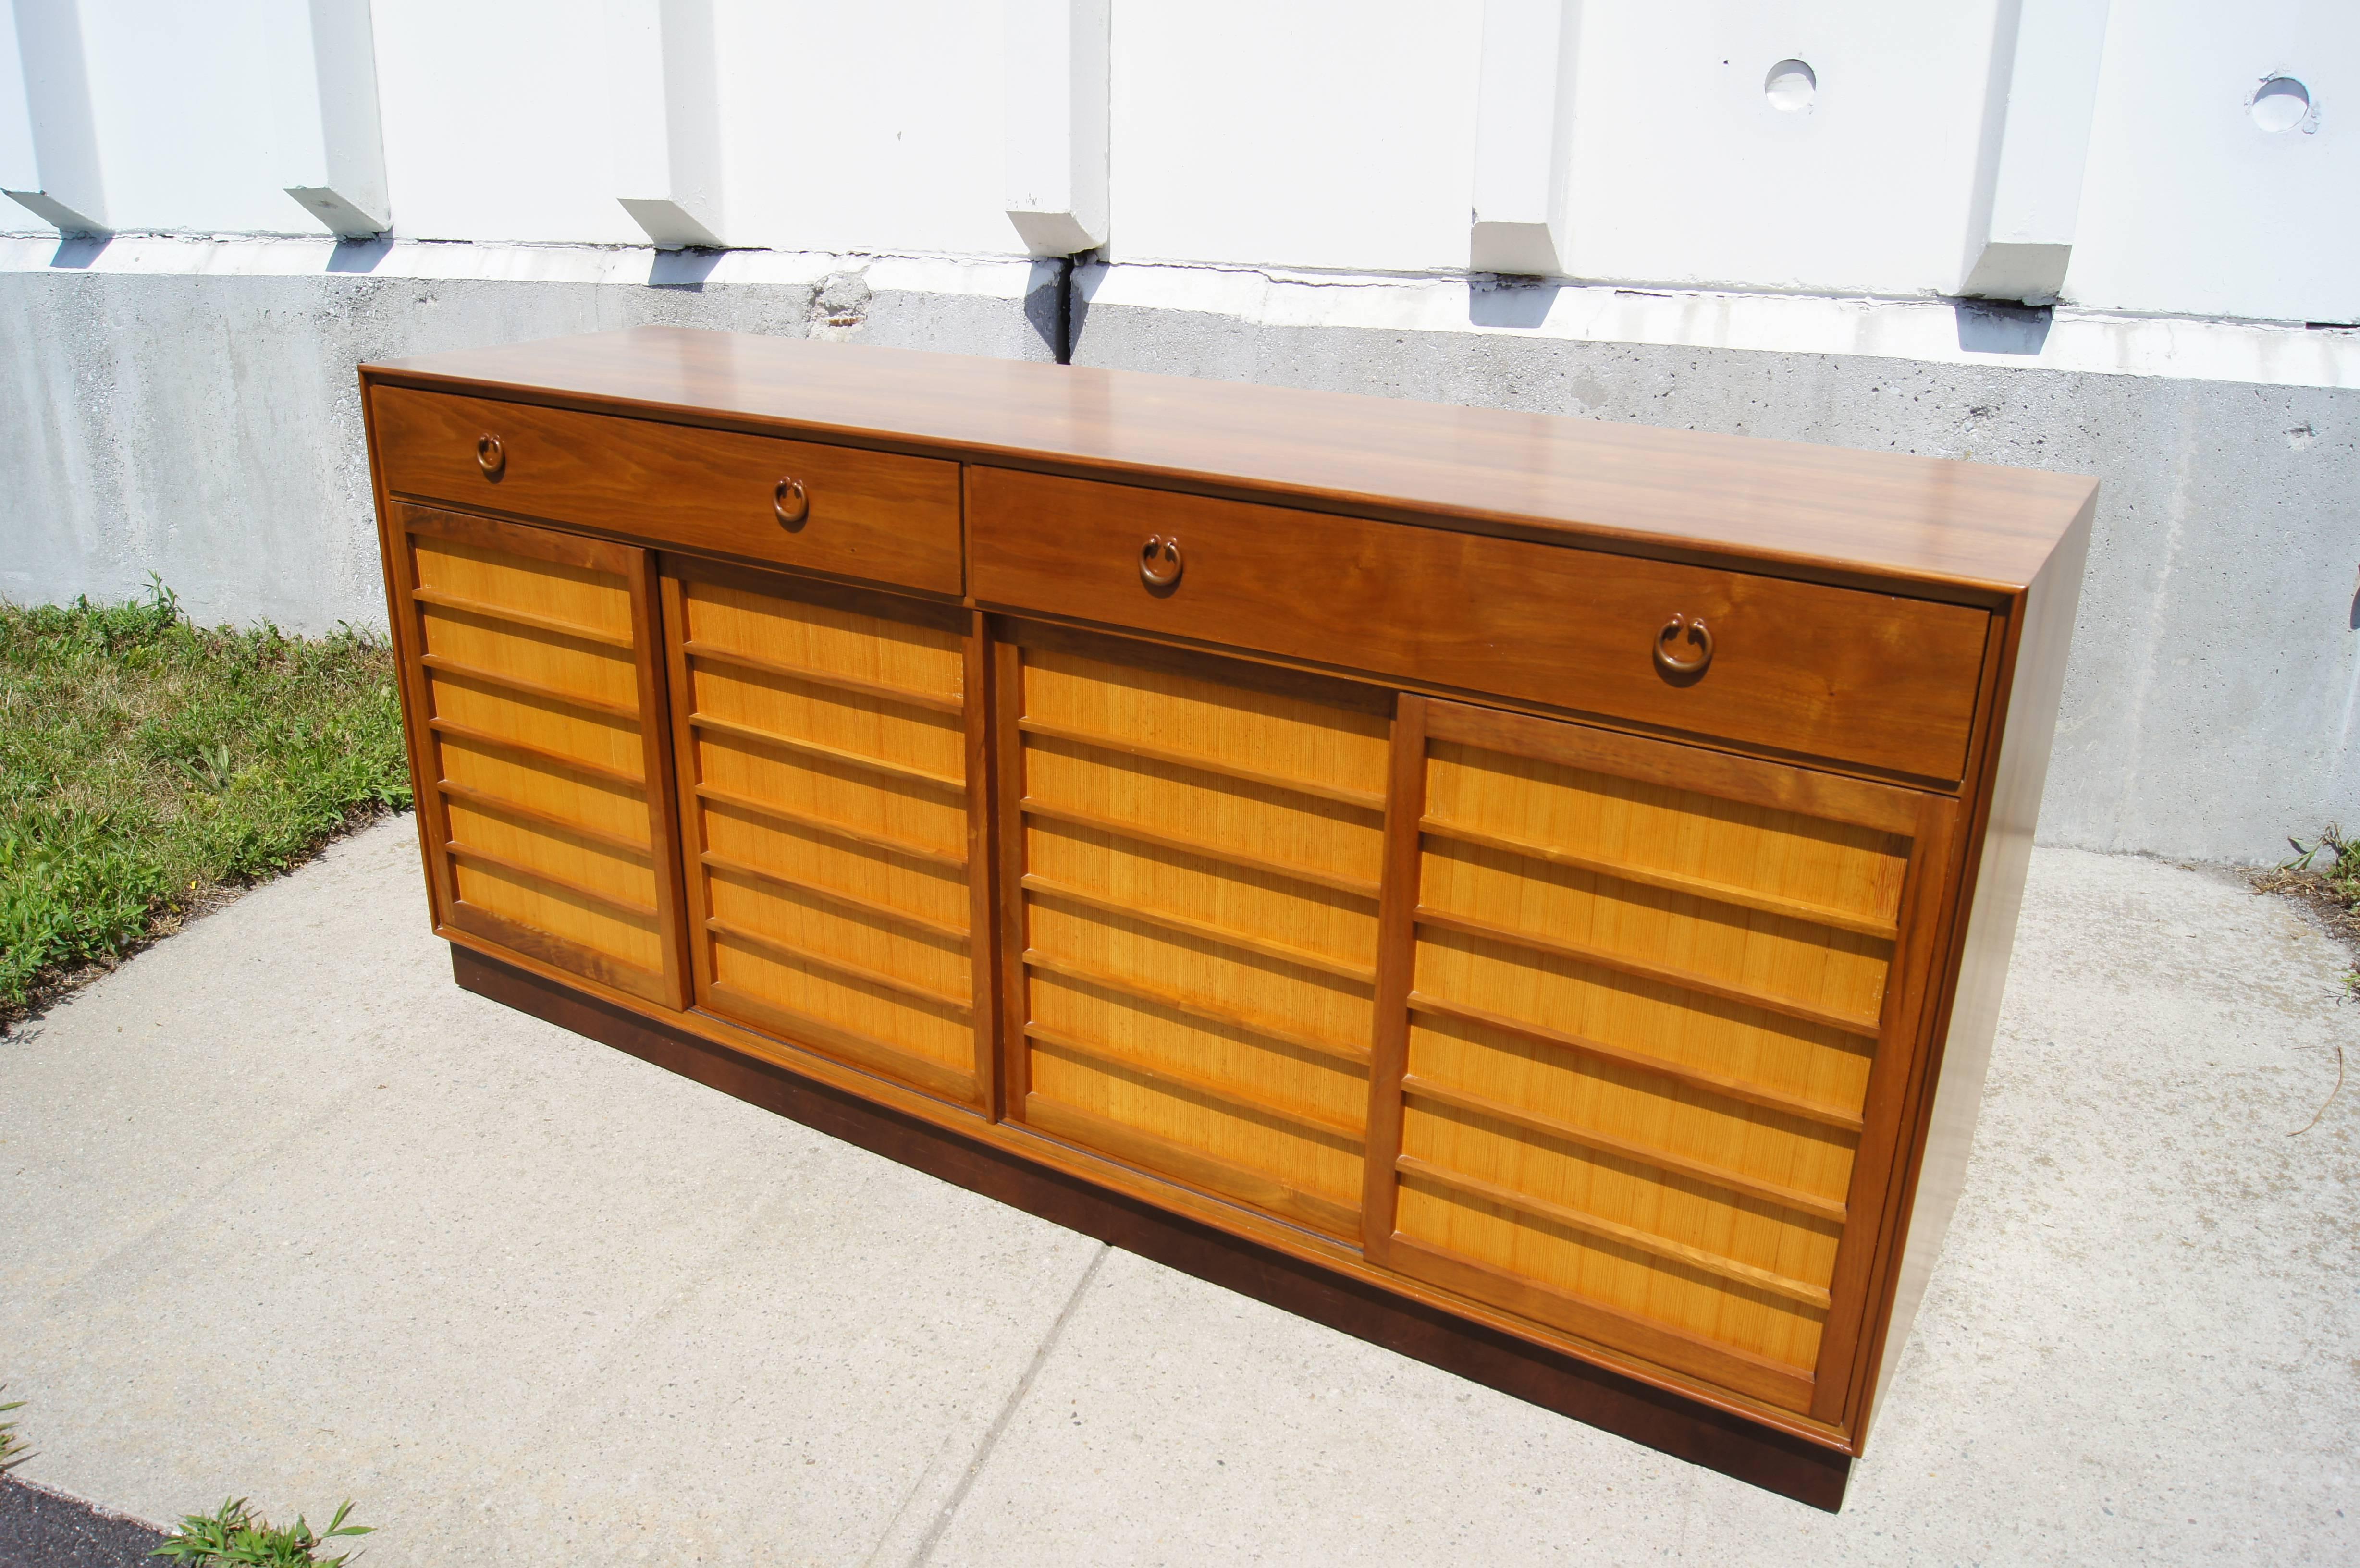 Edward Wormley designed this handsome sideboard, model 671A, for Dunbar in 1953. The case features Japanese fir panels that contrast with the walnut frame.  Two top drawers, one of which is divided, open with round bronze pulls. Behind the four